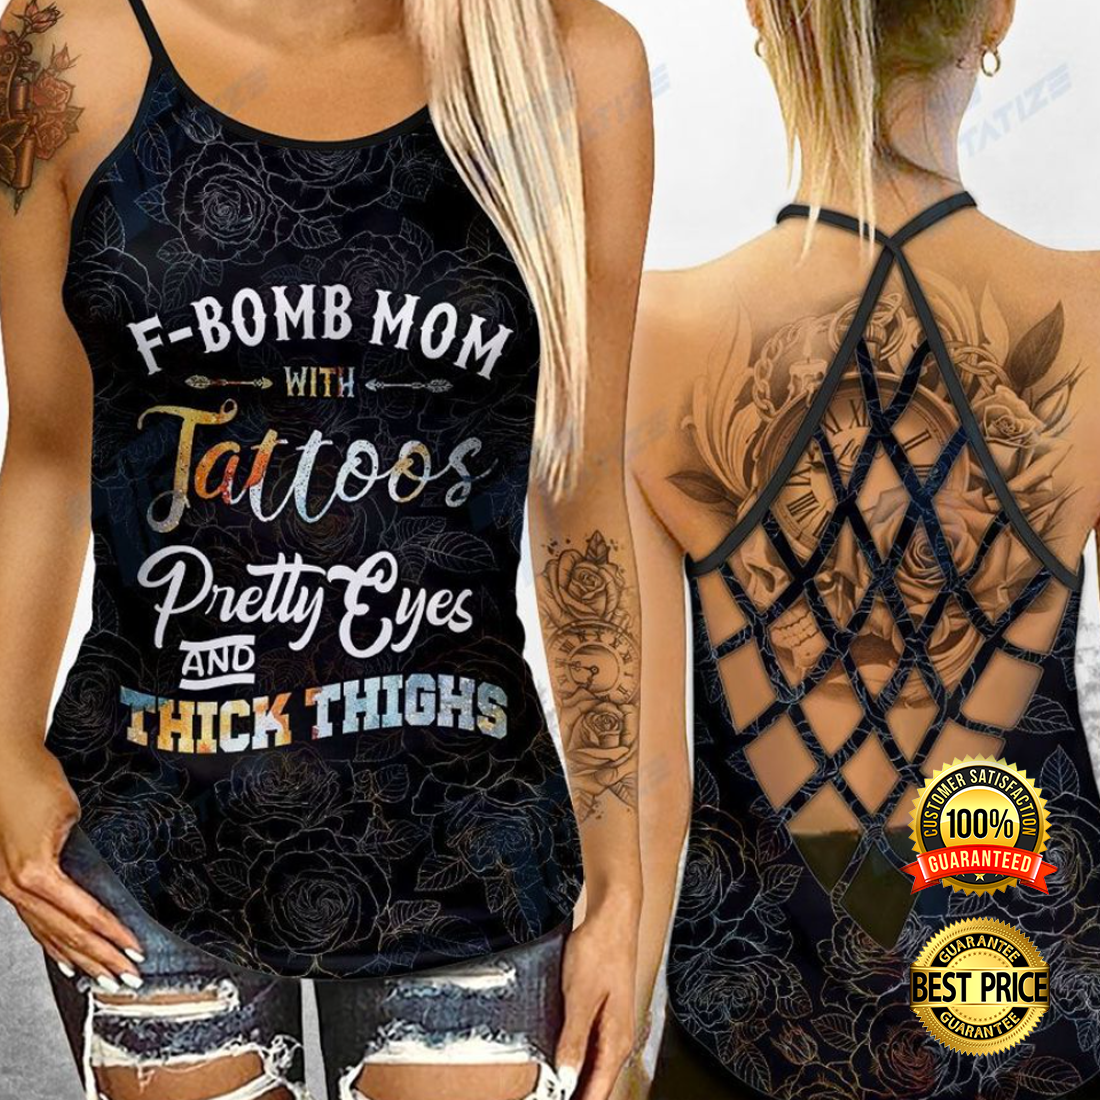 F-bomb mom with tattoos pretty eyes and thick thighs criss-cross tank top 4